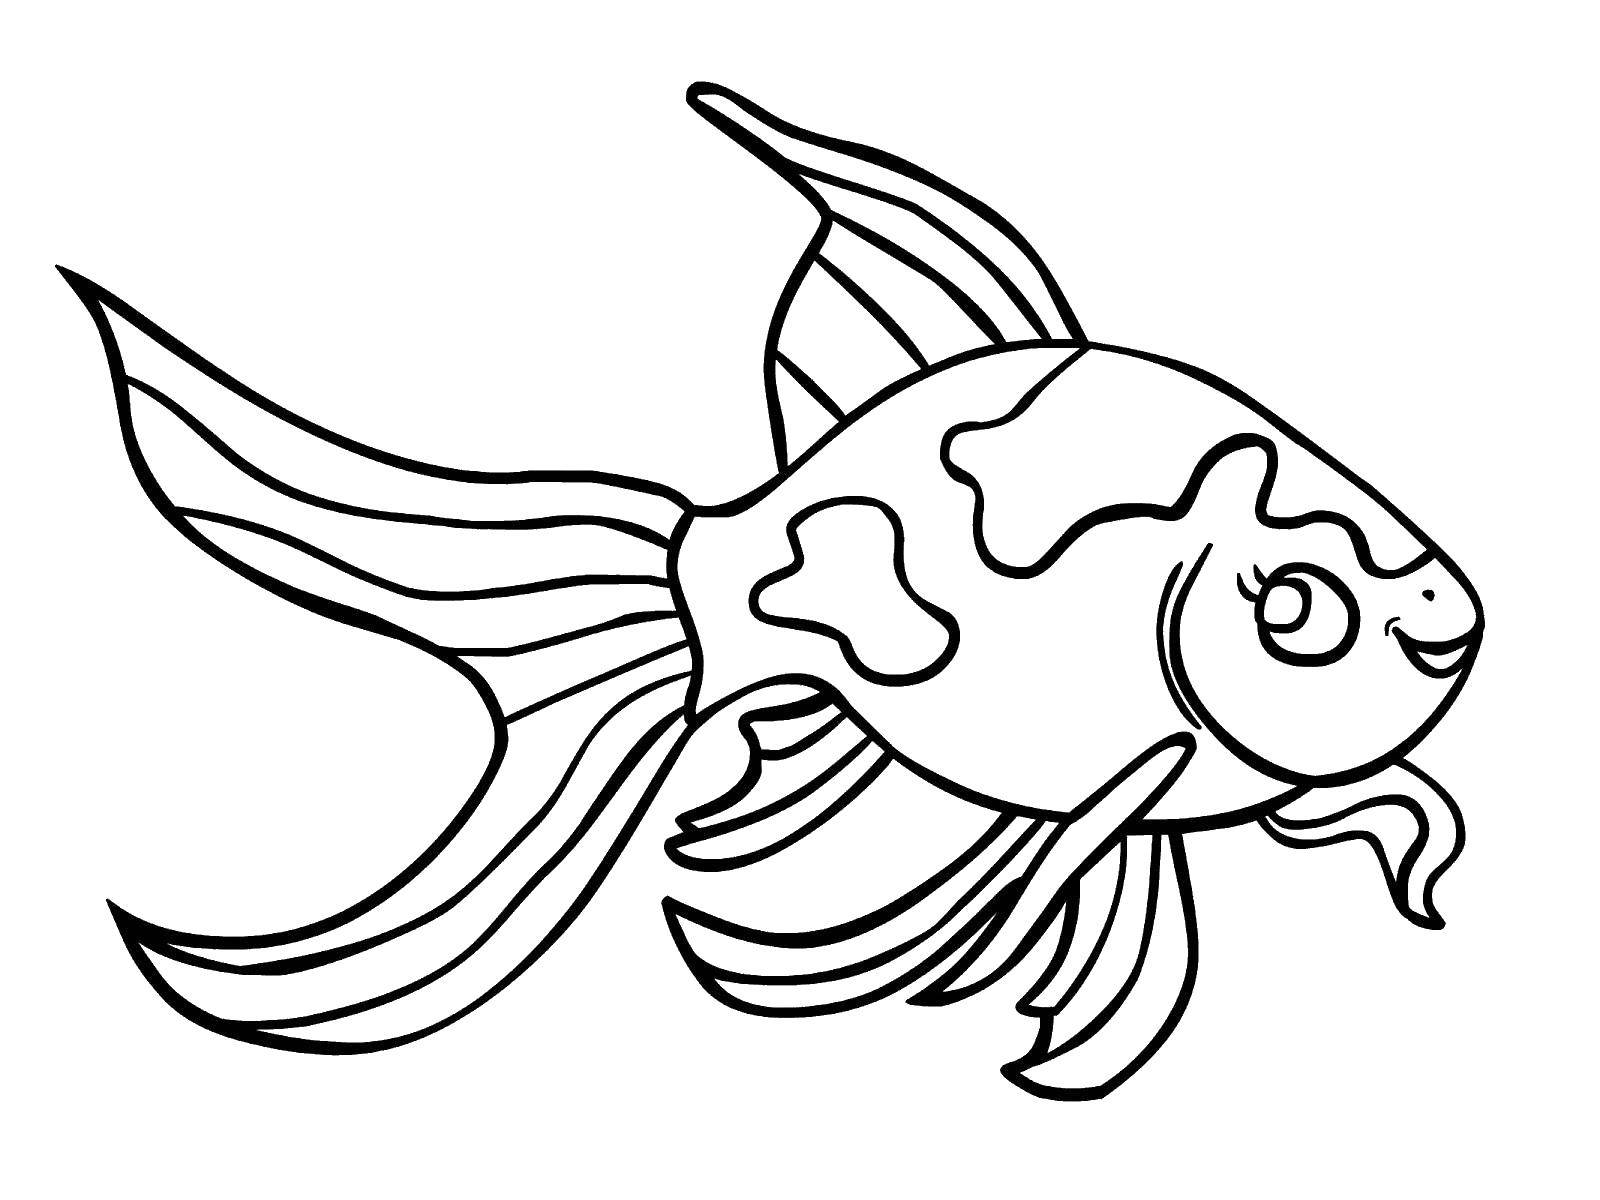 Coloring Spotted fish. Category fish. Tags:  fish, fin, tail.